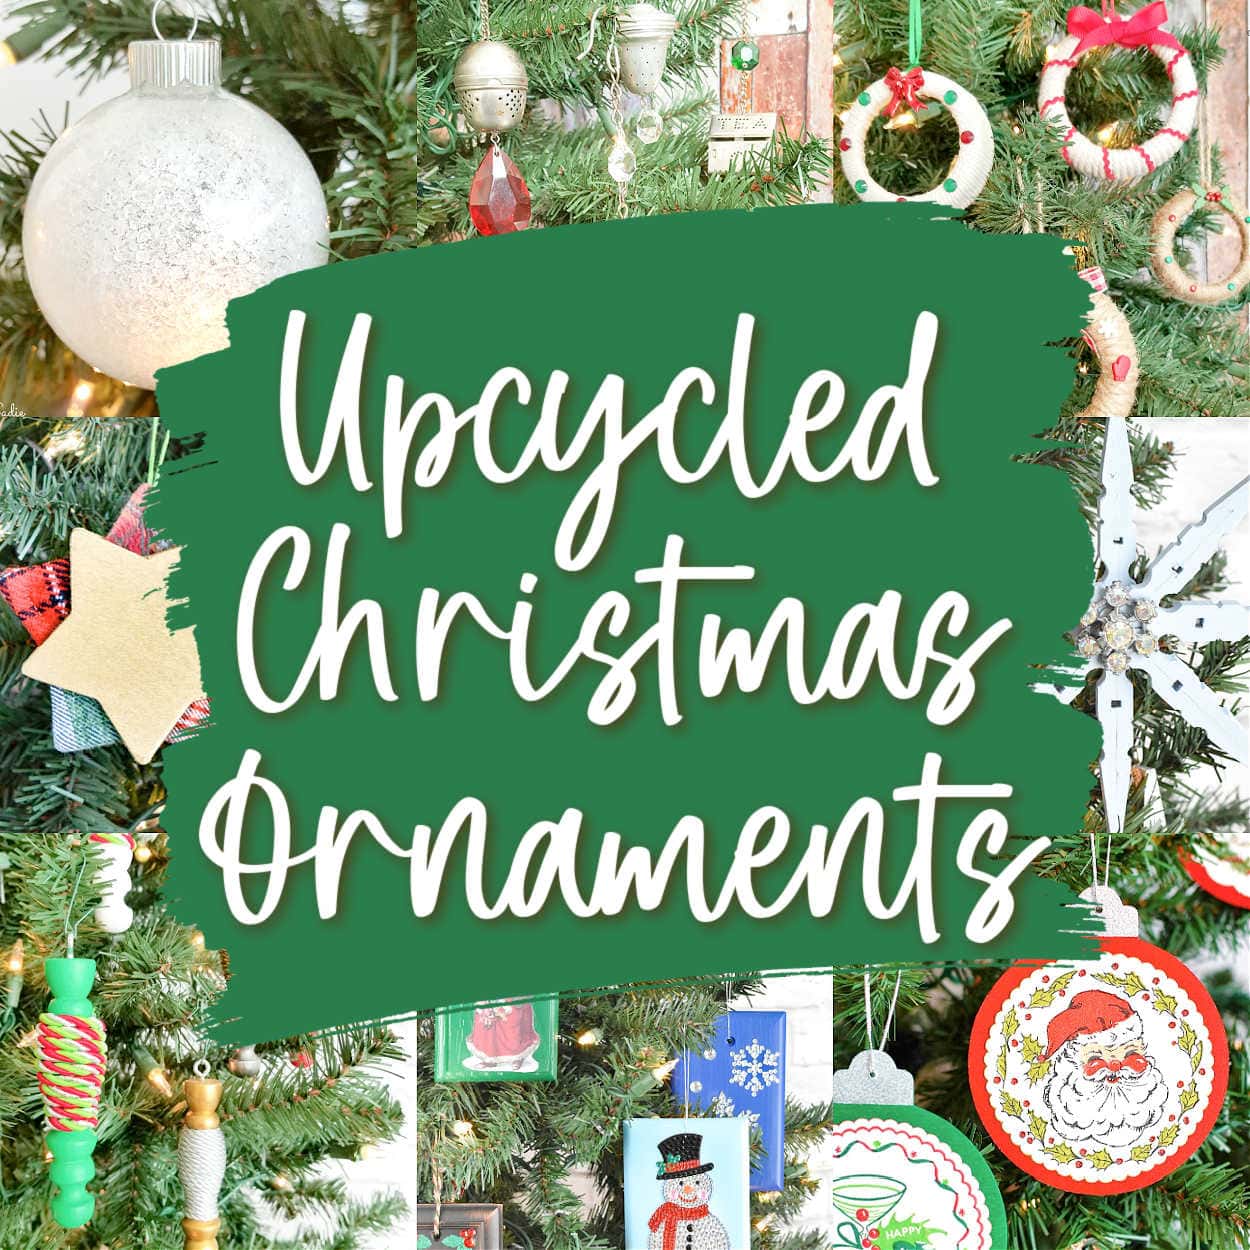 Repurposed Ornaments and Christmas Ornament Crafts